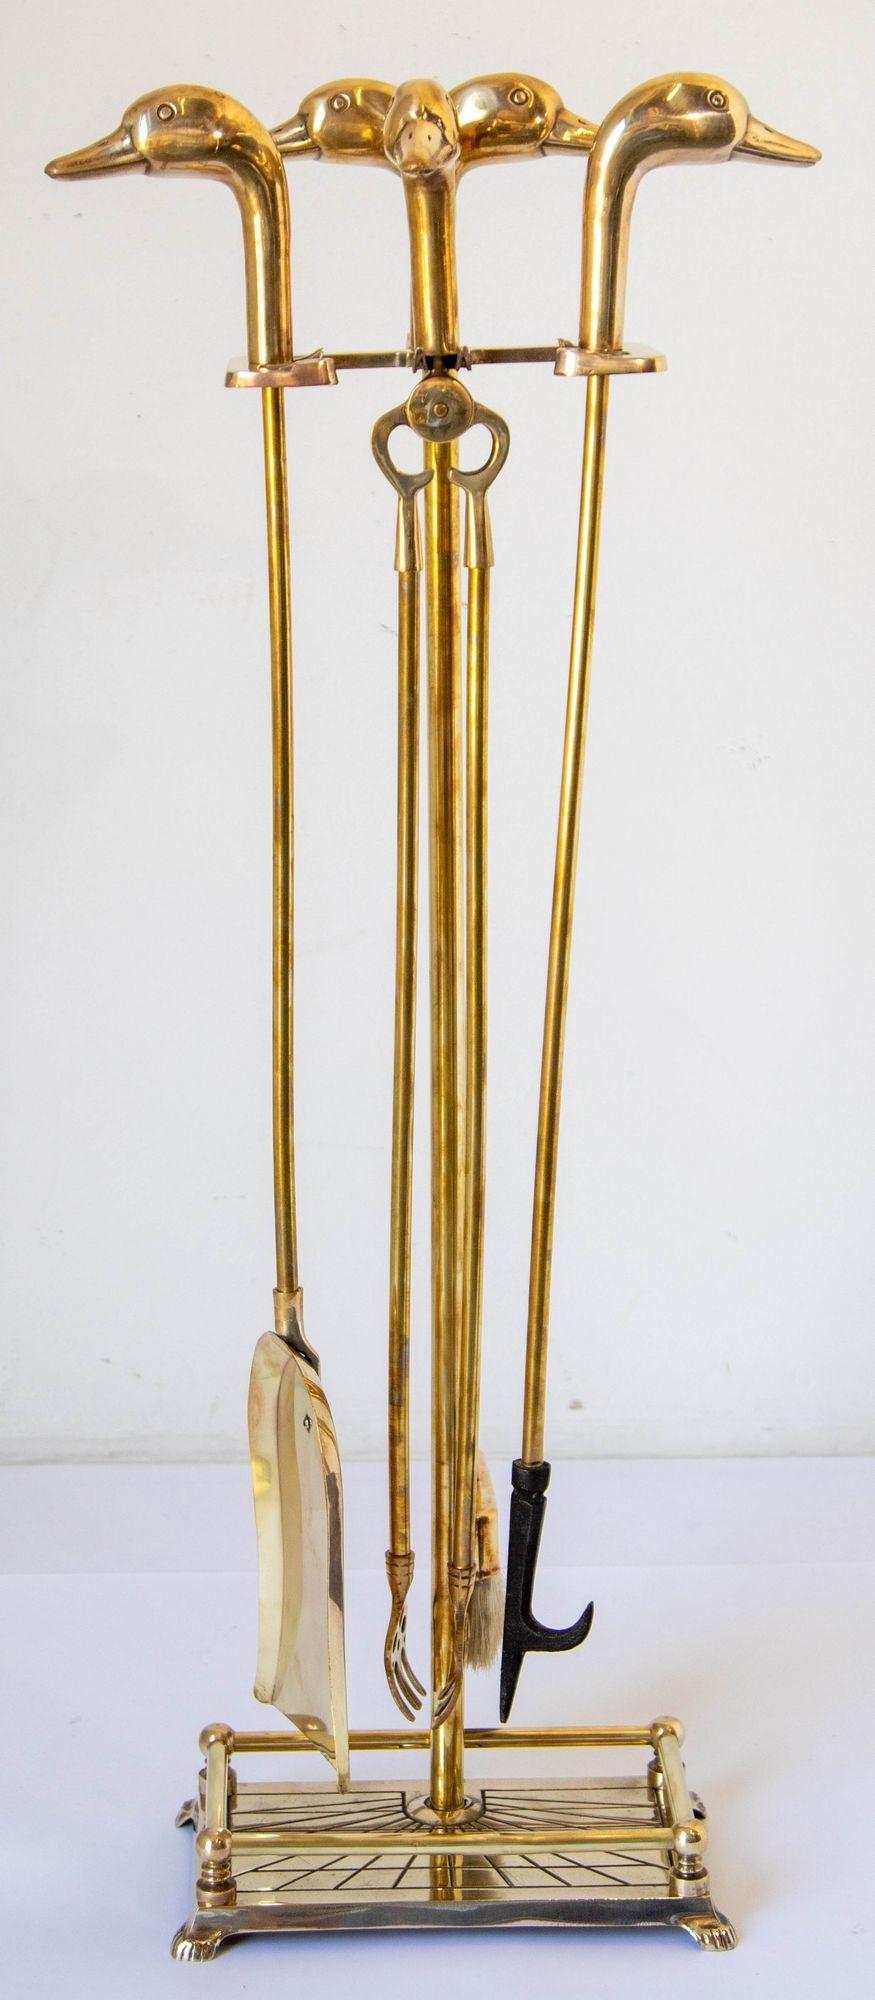 1950s Vintage fireplace tools in solid polished brass with duck heads, French, five-pieces, fire tool set features a polished brass metal frame and four tools with duck head handles.
Five-pieces, fireplace tool set features a brass metal frame and